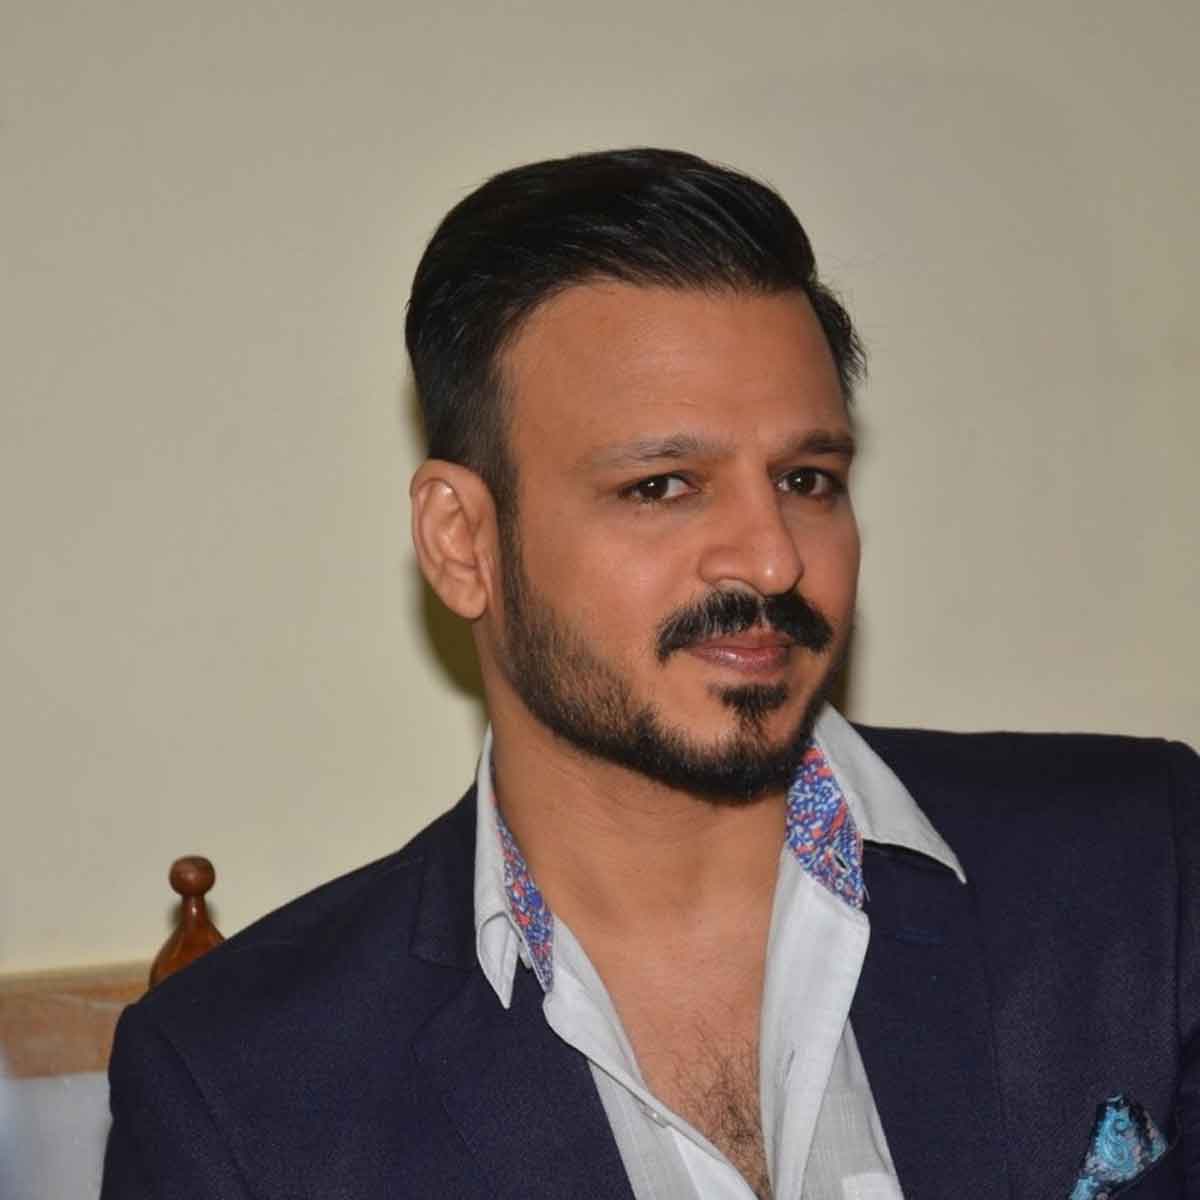 EXCLUSIVE: Vivek Oberoi admits he was cynical about love before meeting his wife Priyanka